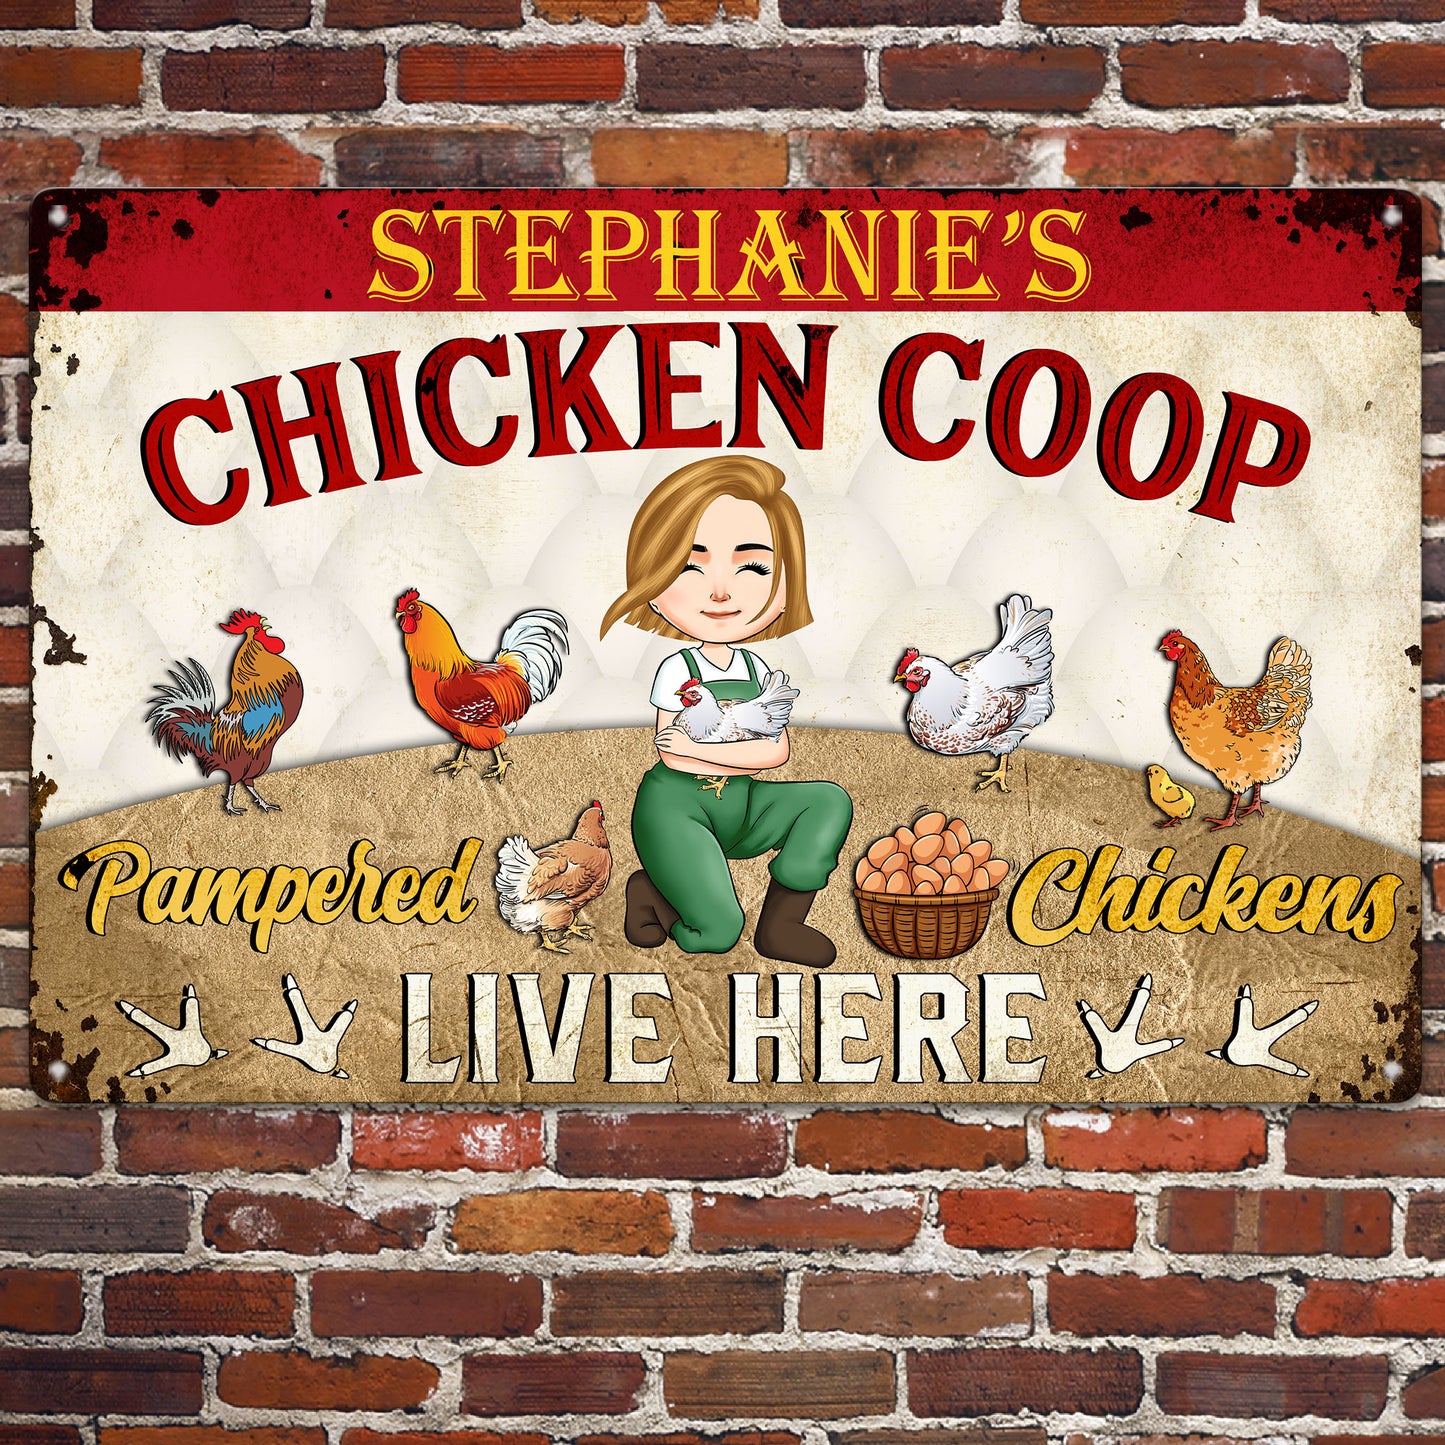 Pampered Chickens Live Here - Personalized Metal Sign - Chicken Coop Decoration, Funny Chicken, Farmhouse Decorations Gift For Chicken Lovers, Farmer